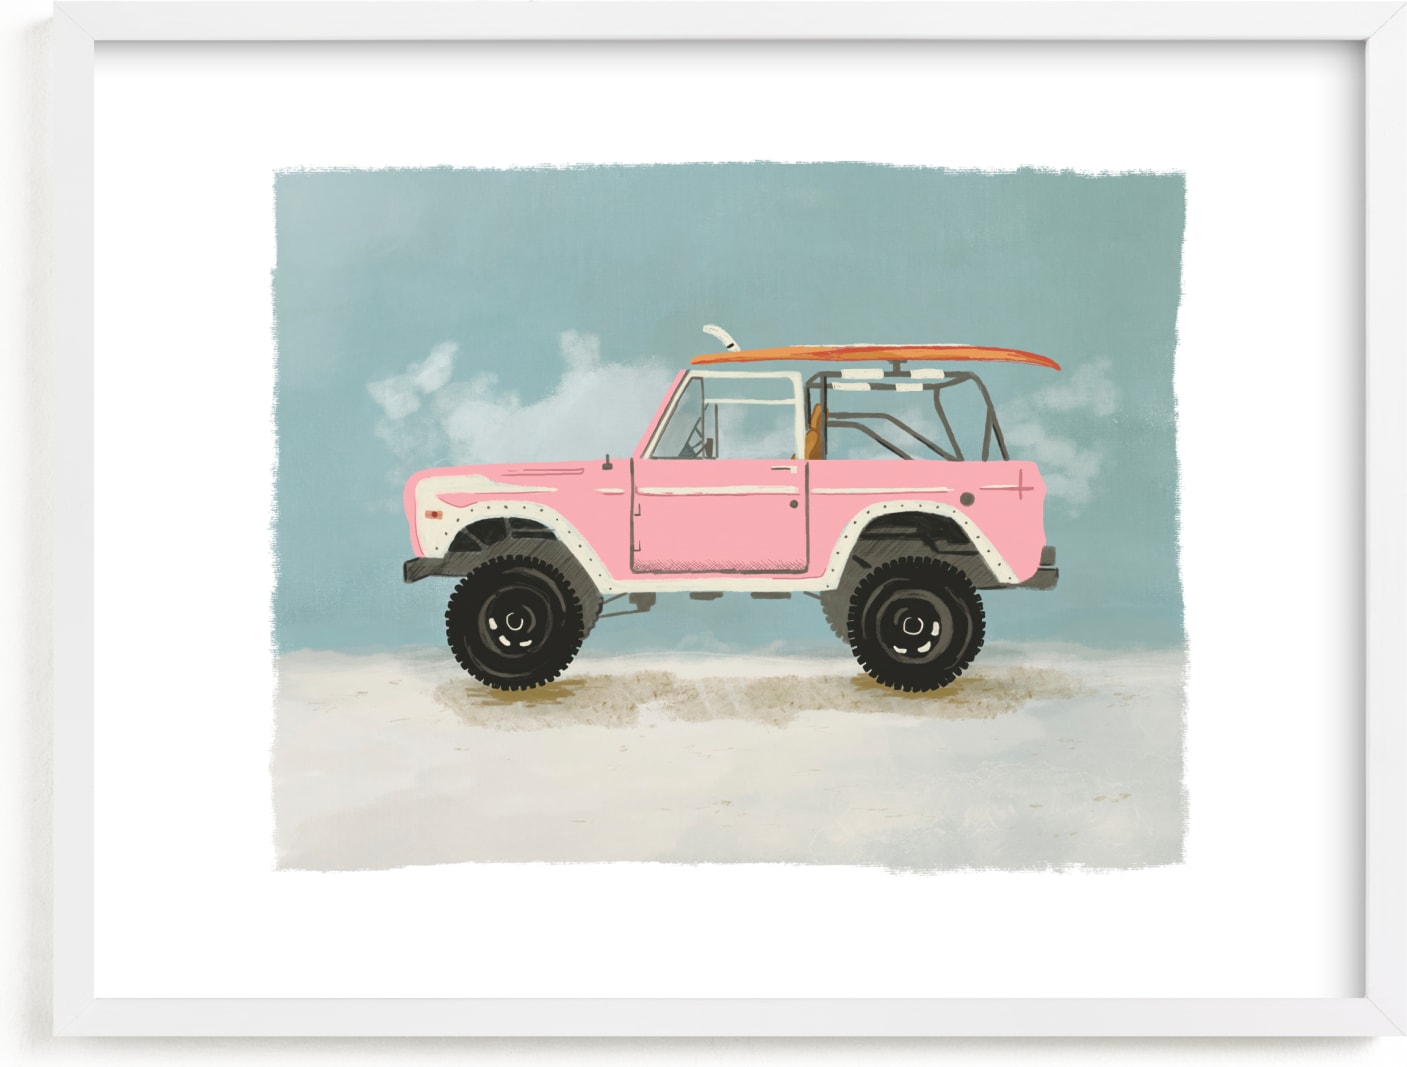 This is a blue art by Erin Kessler called Surf Pink.